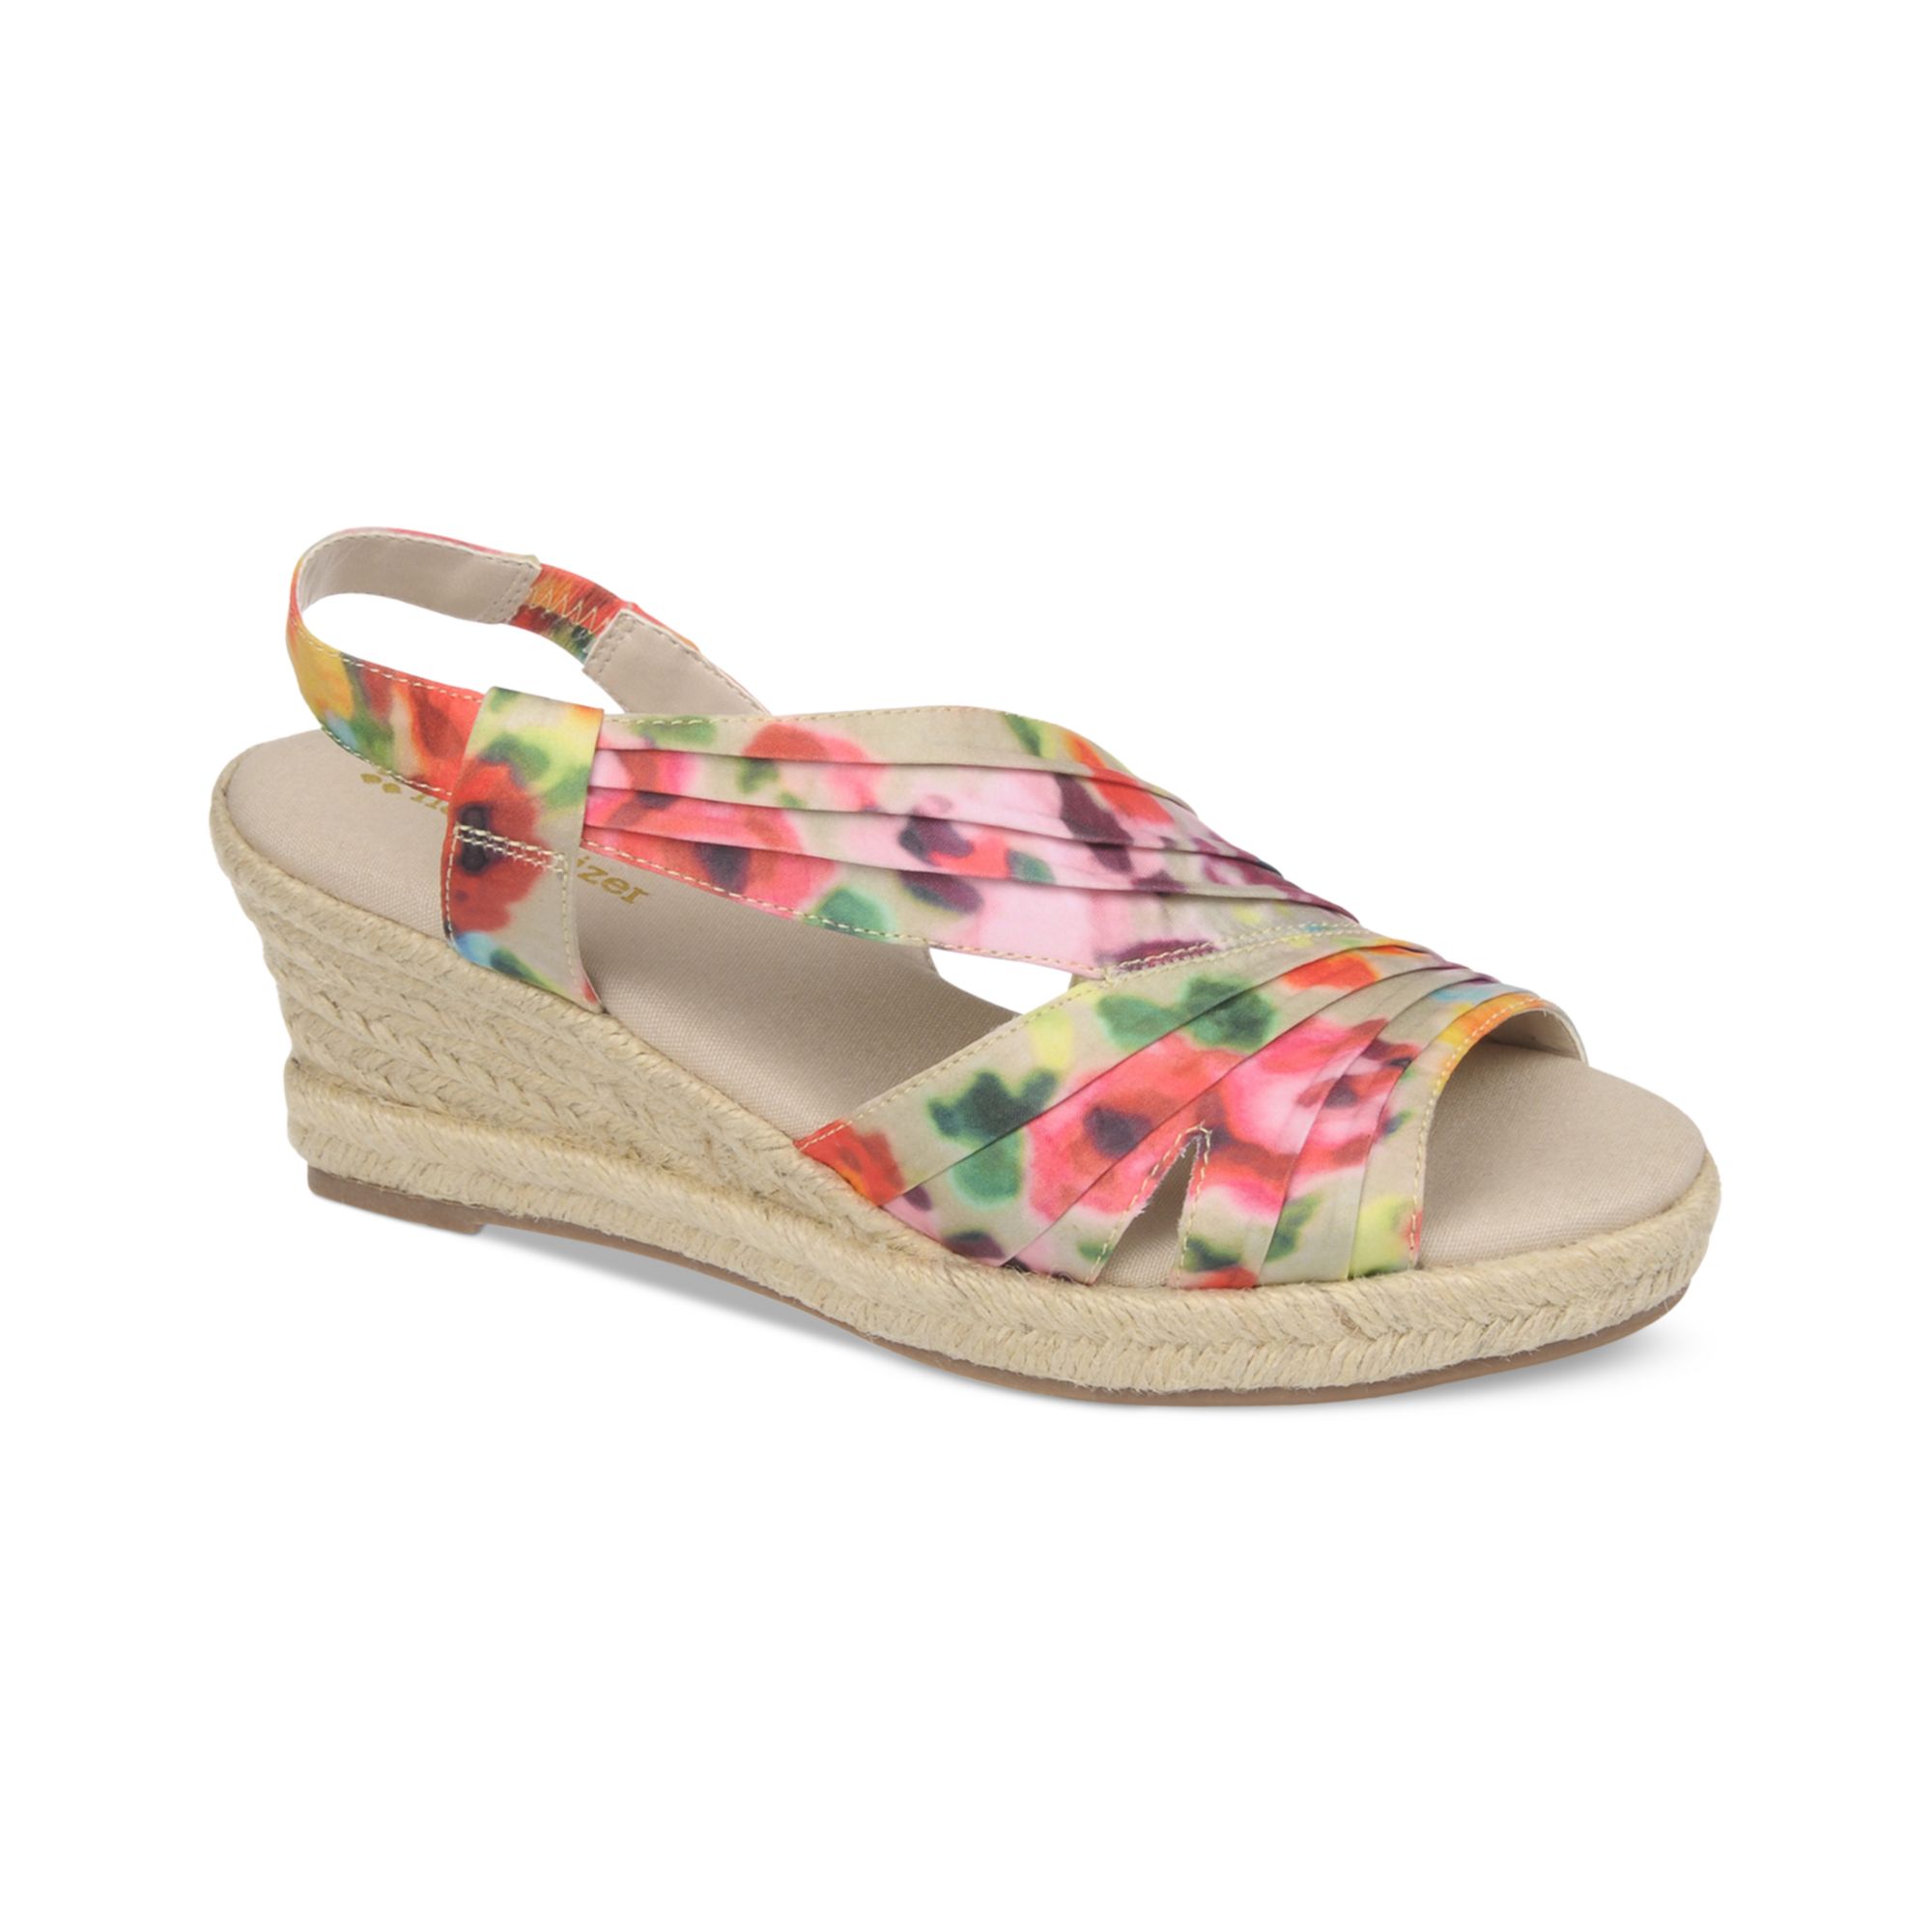 Naturalizer heels wedges wedge sandals in Floral | Lyst